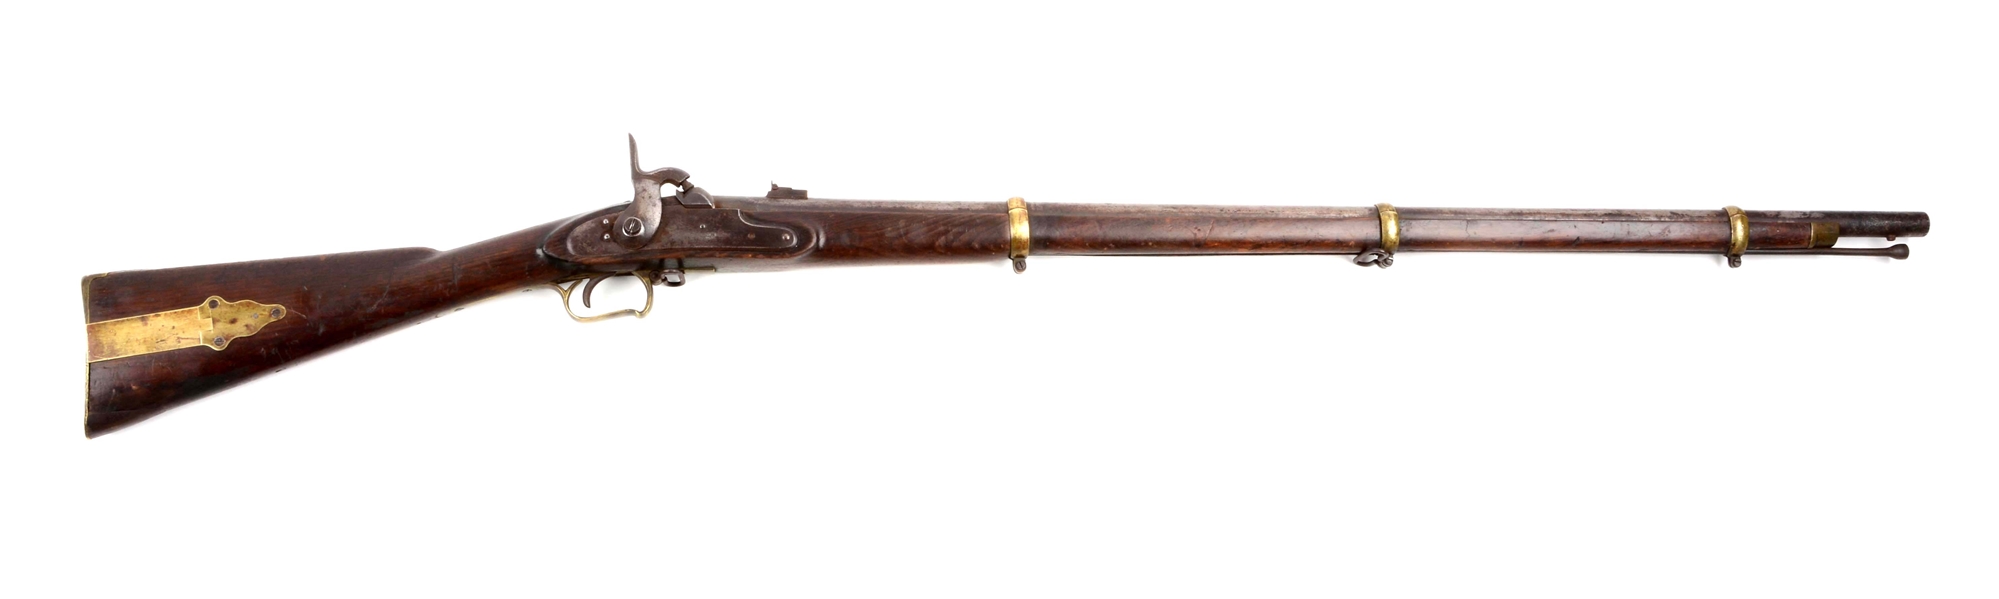 (A) P.S. JUSTICE OF PHILADELPHIA MODEL 1842 MUSKET.